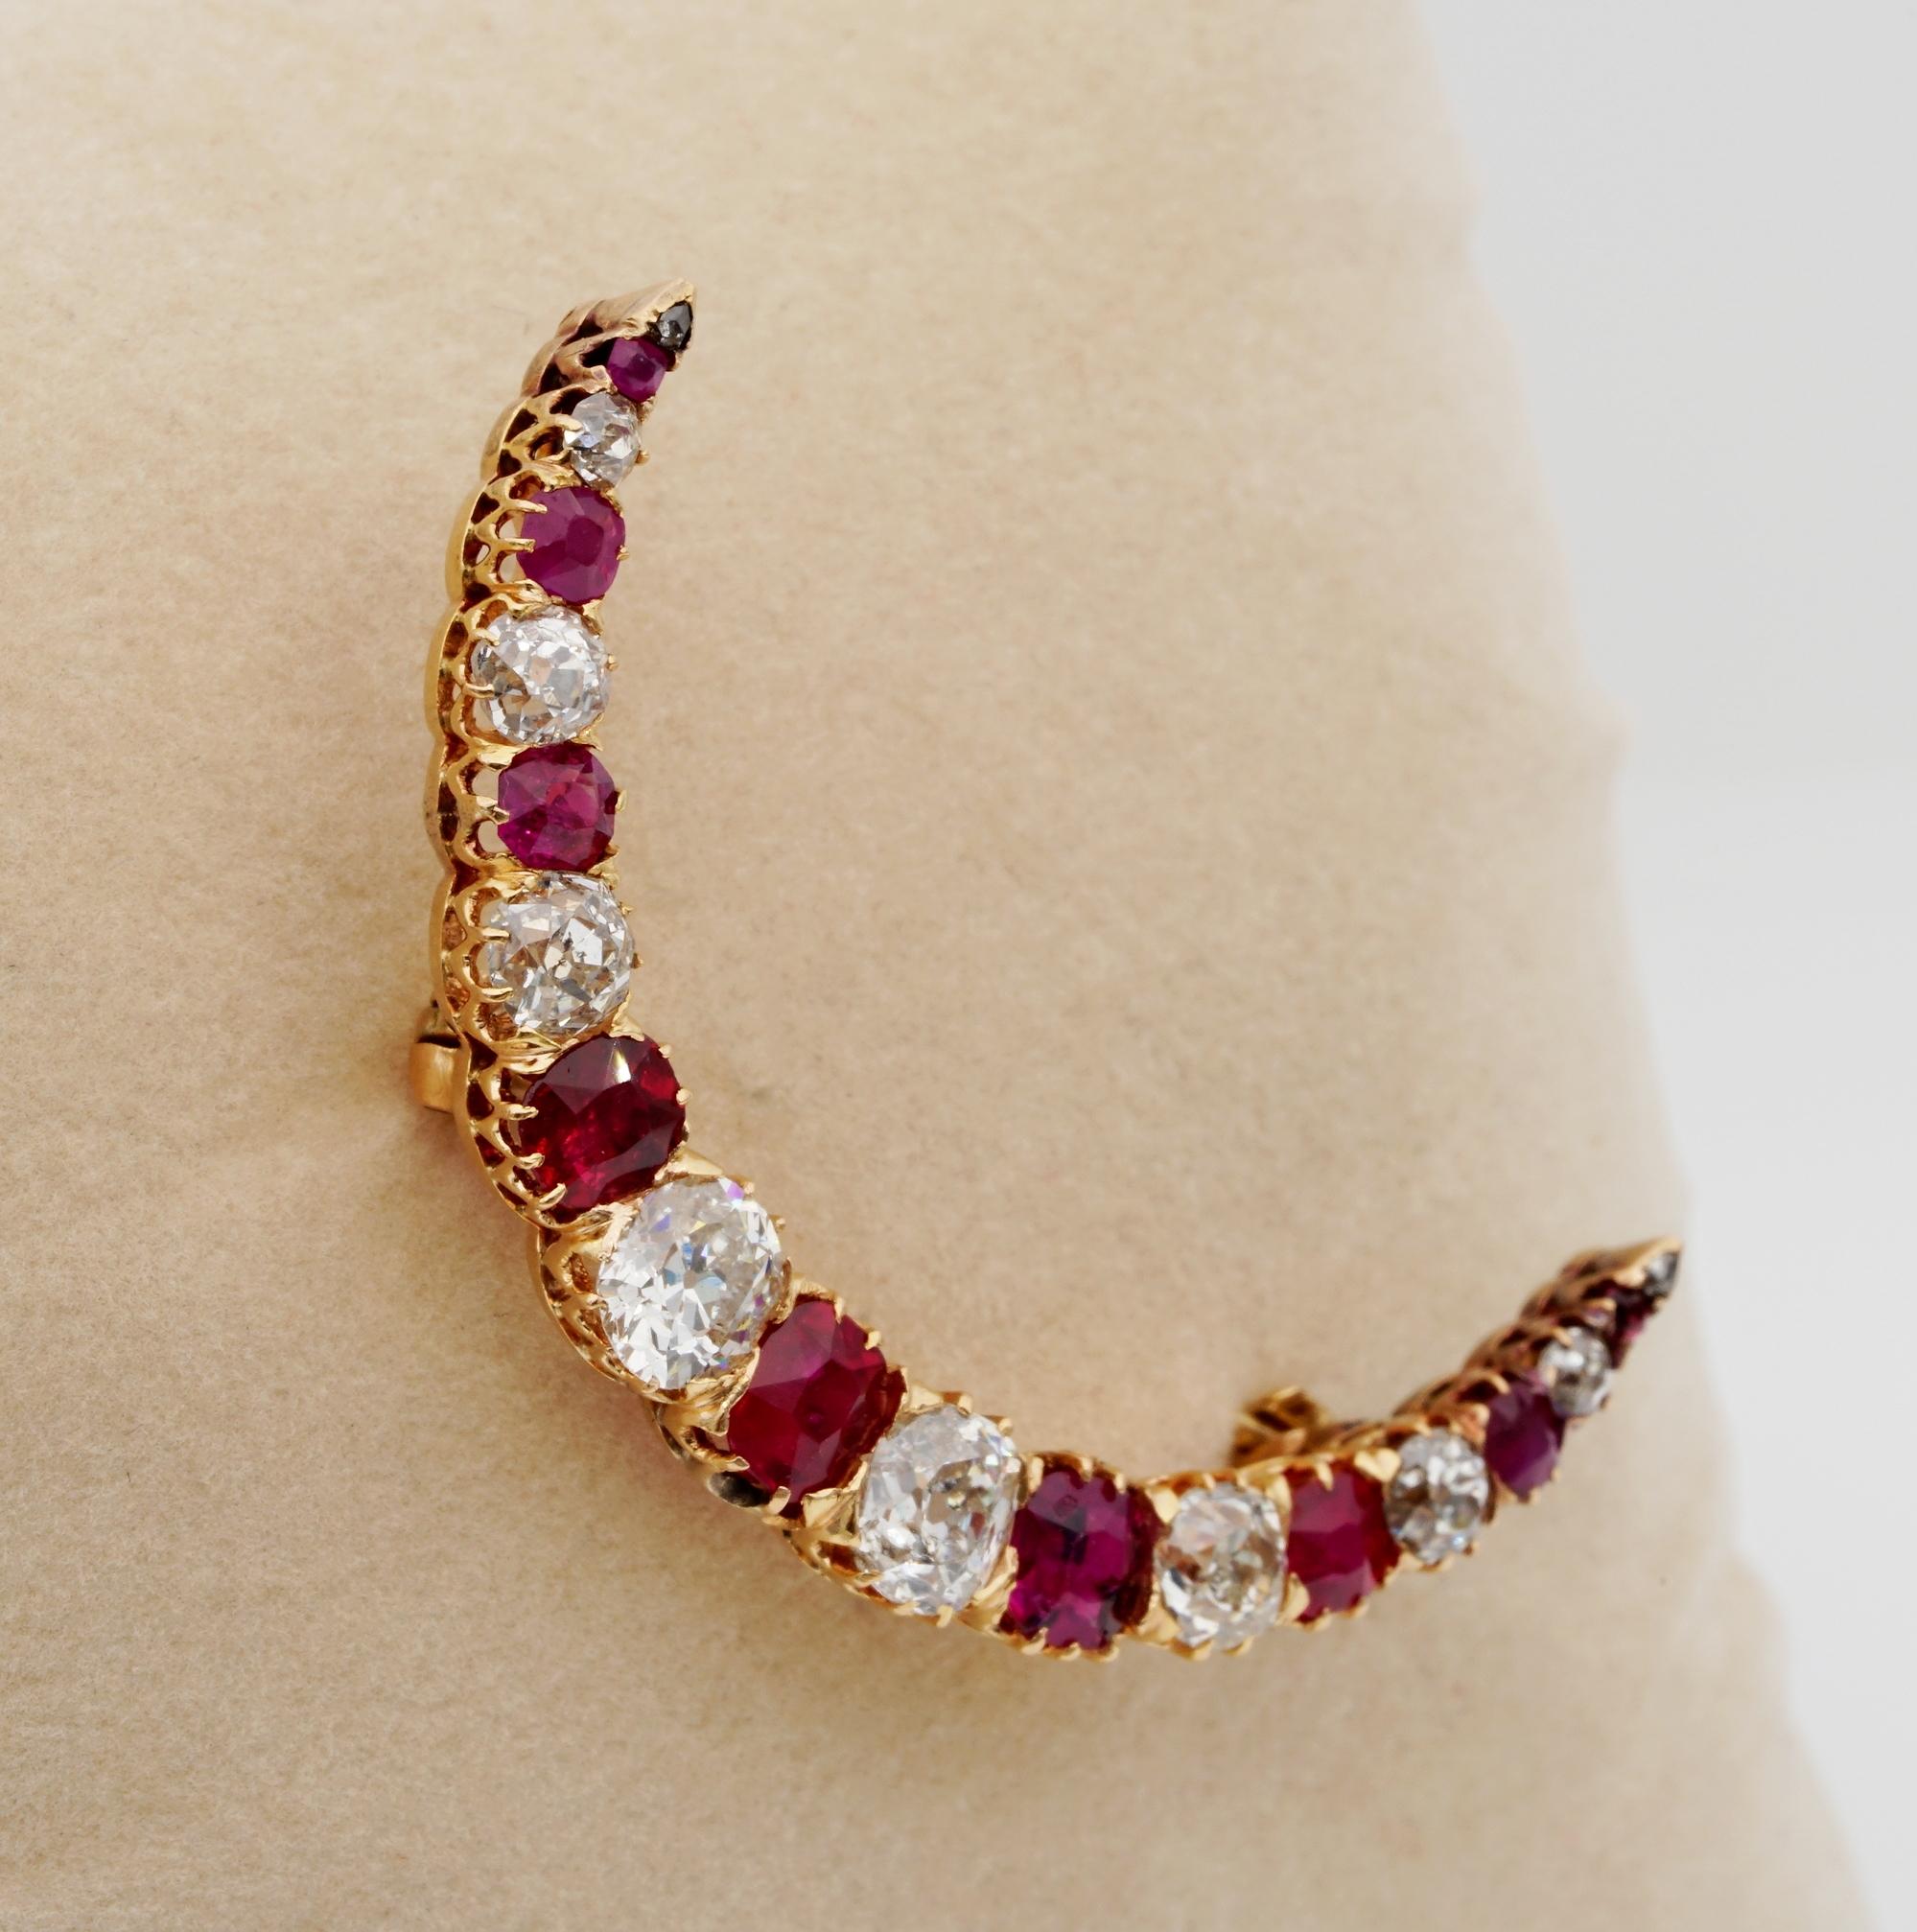 Moon Delight

A very popular feminine symbol in the Victorian era was the mystical crescent moon motif, traditionally embellished with Diamonds whist this rare example is set with a selection of Natural Rubies as well old mine cut
Celestial